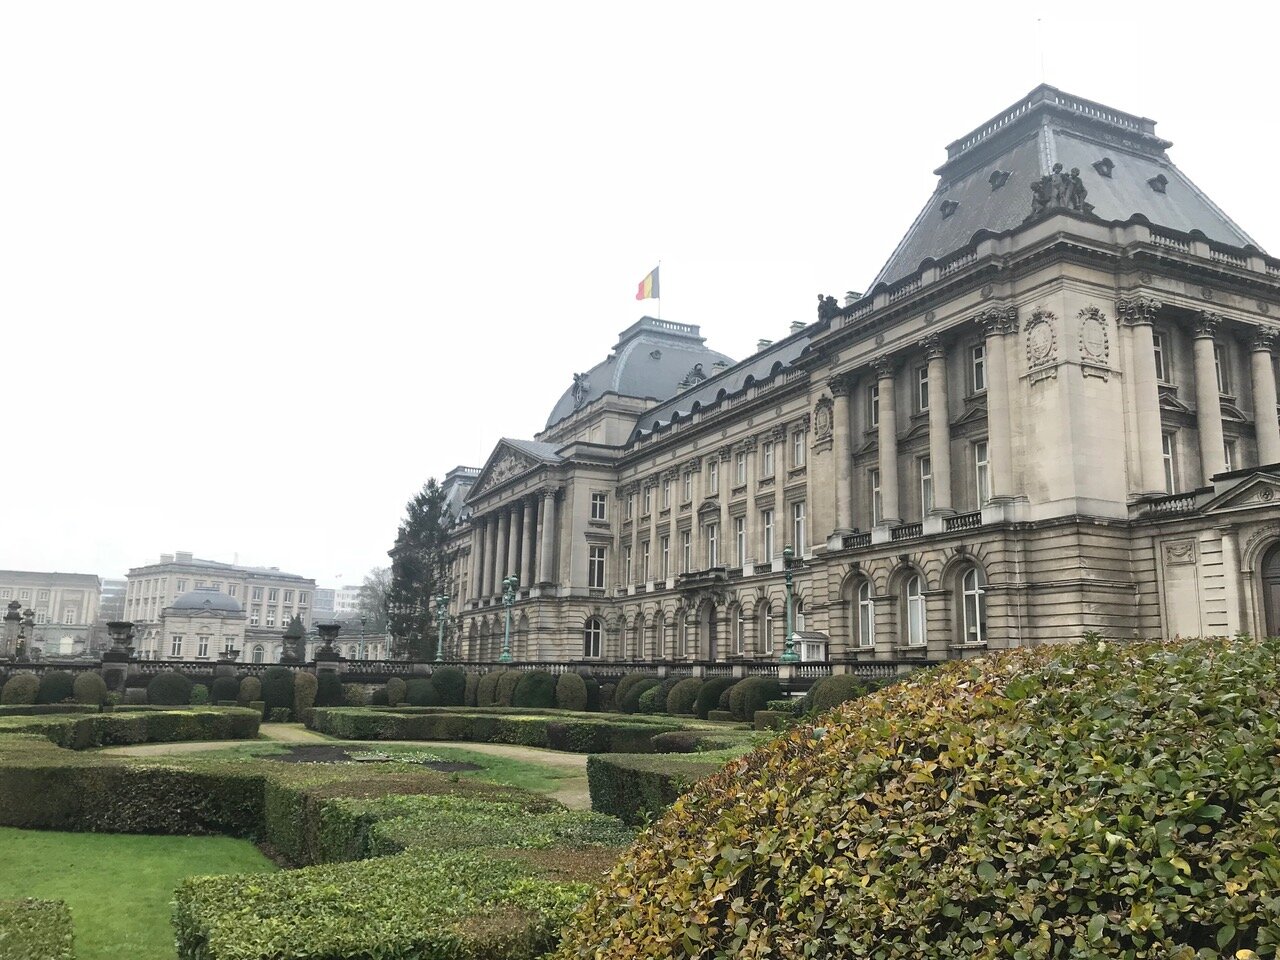 The Royal palace of Brussels is essentially built on blood money from the "colonization" of the Congo. See its grandeur and learn its horrific history. 